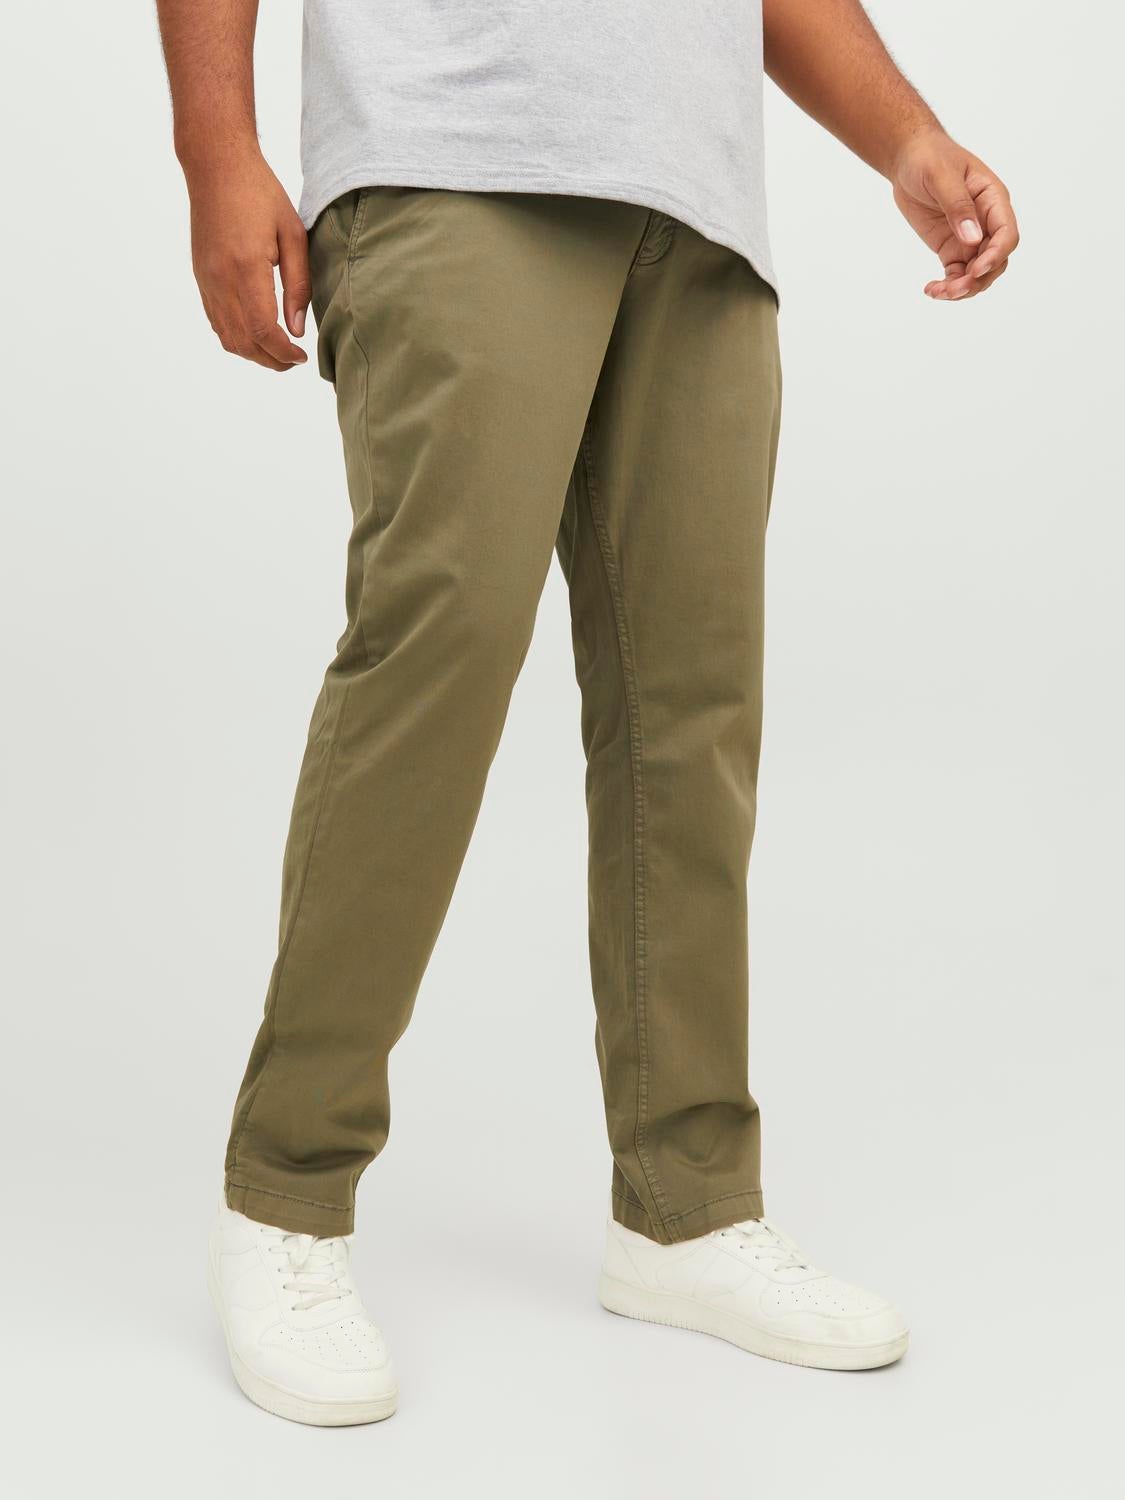 Buy Urbano Plus Mens Olive Green Cotton Regular Fit Casual Chinos Trousers  Stretch pluschinopolivegrn40 at Amazonin